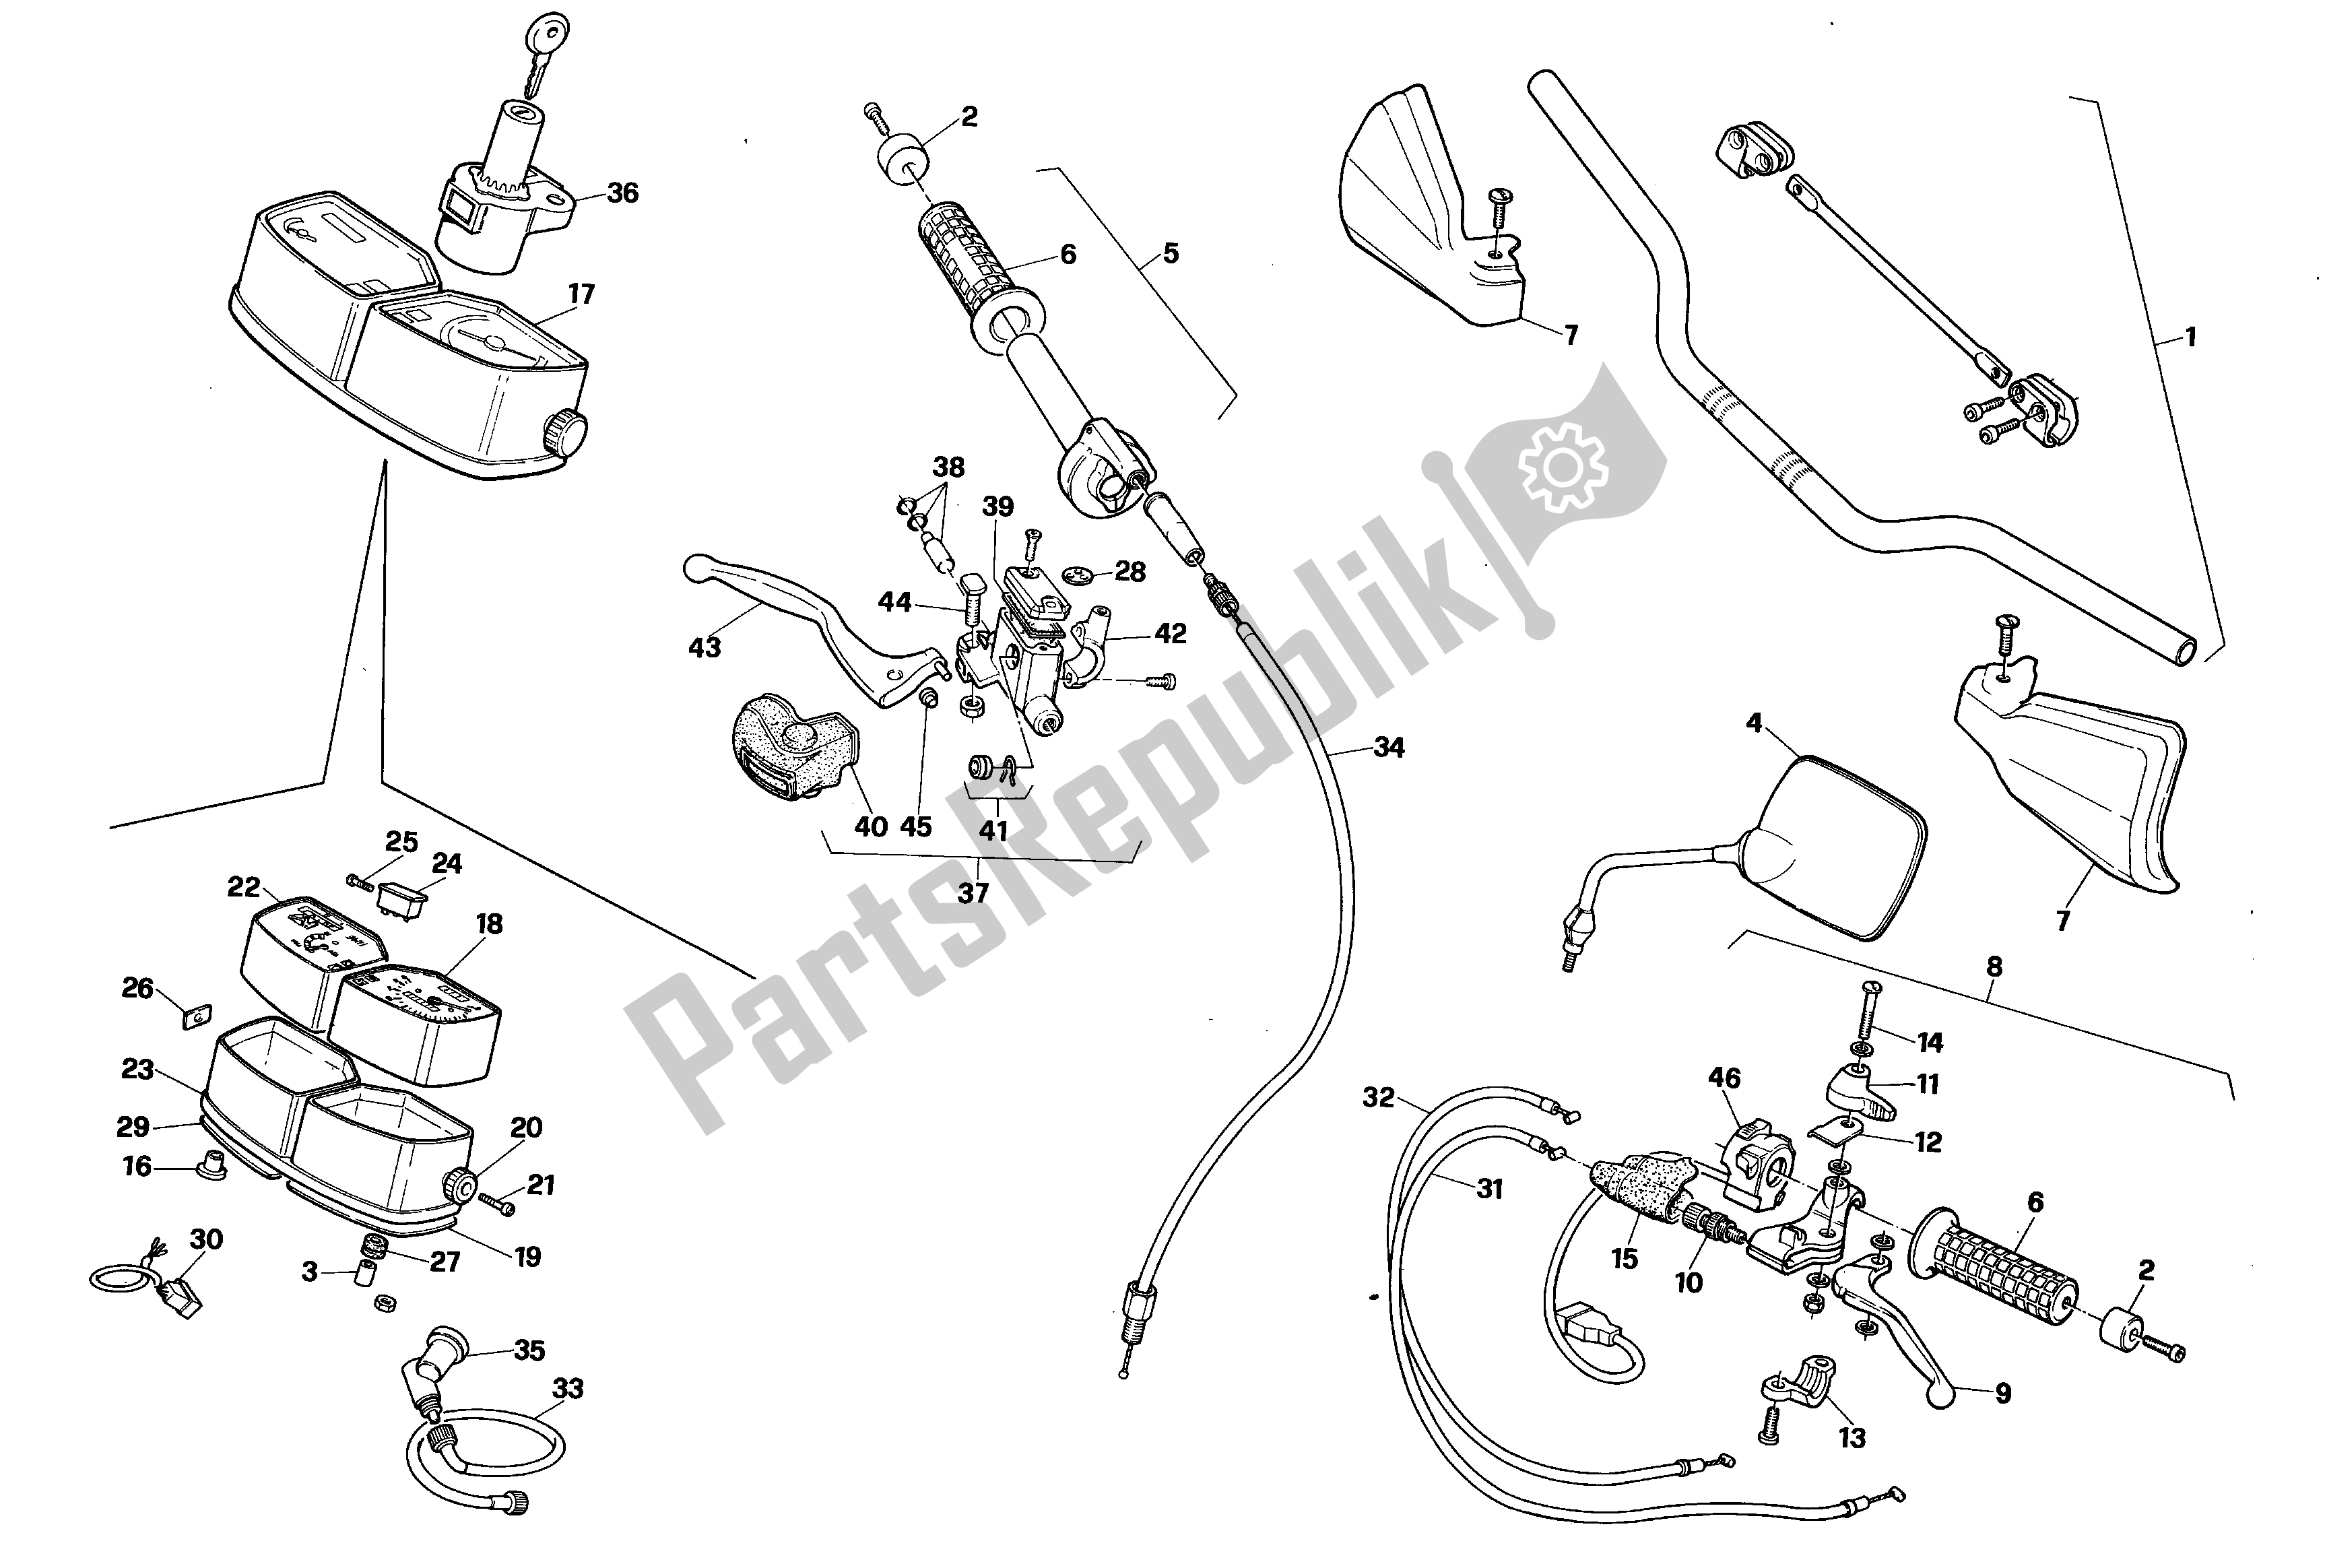 All parts for the Handle Bars And Commands of the Aprilia Tuareg 125 1989 - 1990